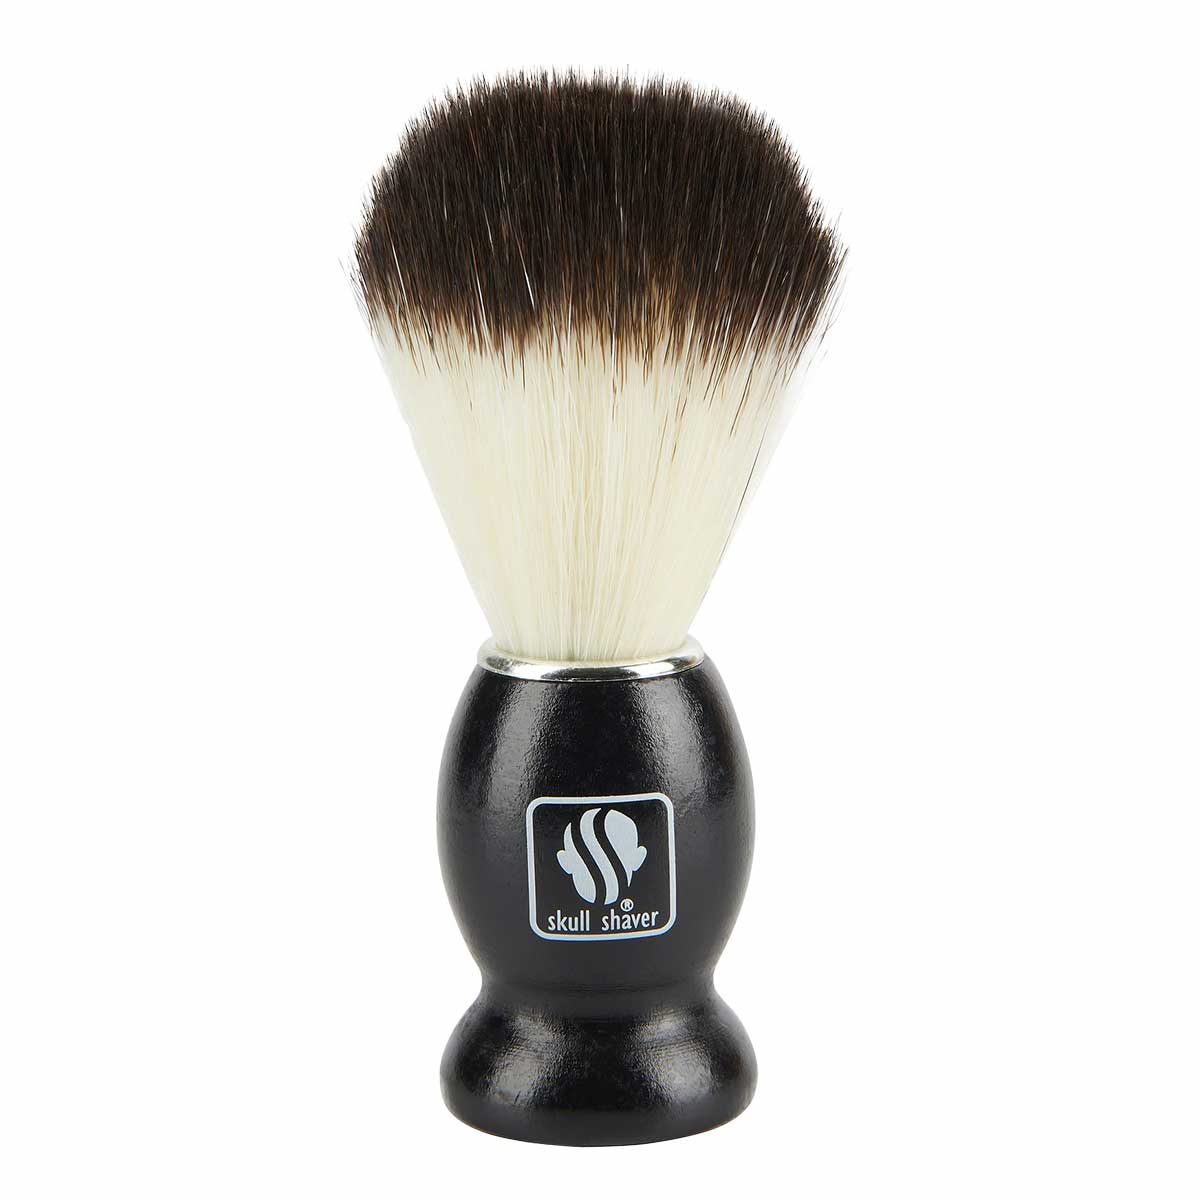 skull shaver wet shaving brush comes with a black impact resistant handle and cruelty synthetic bristles